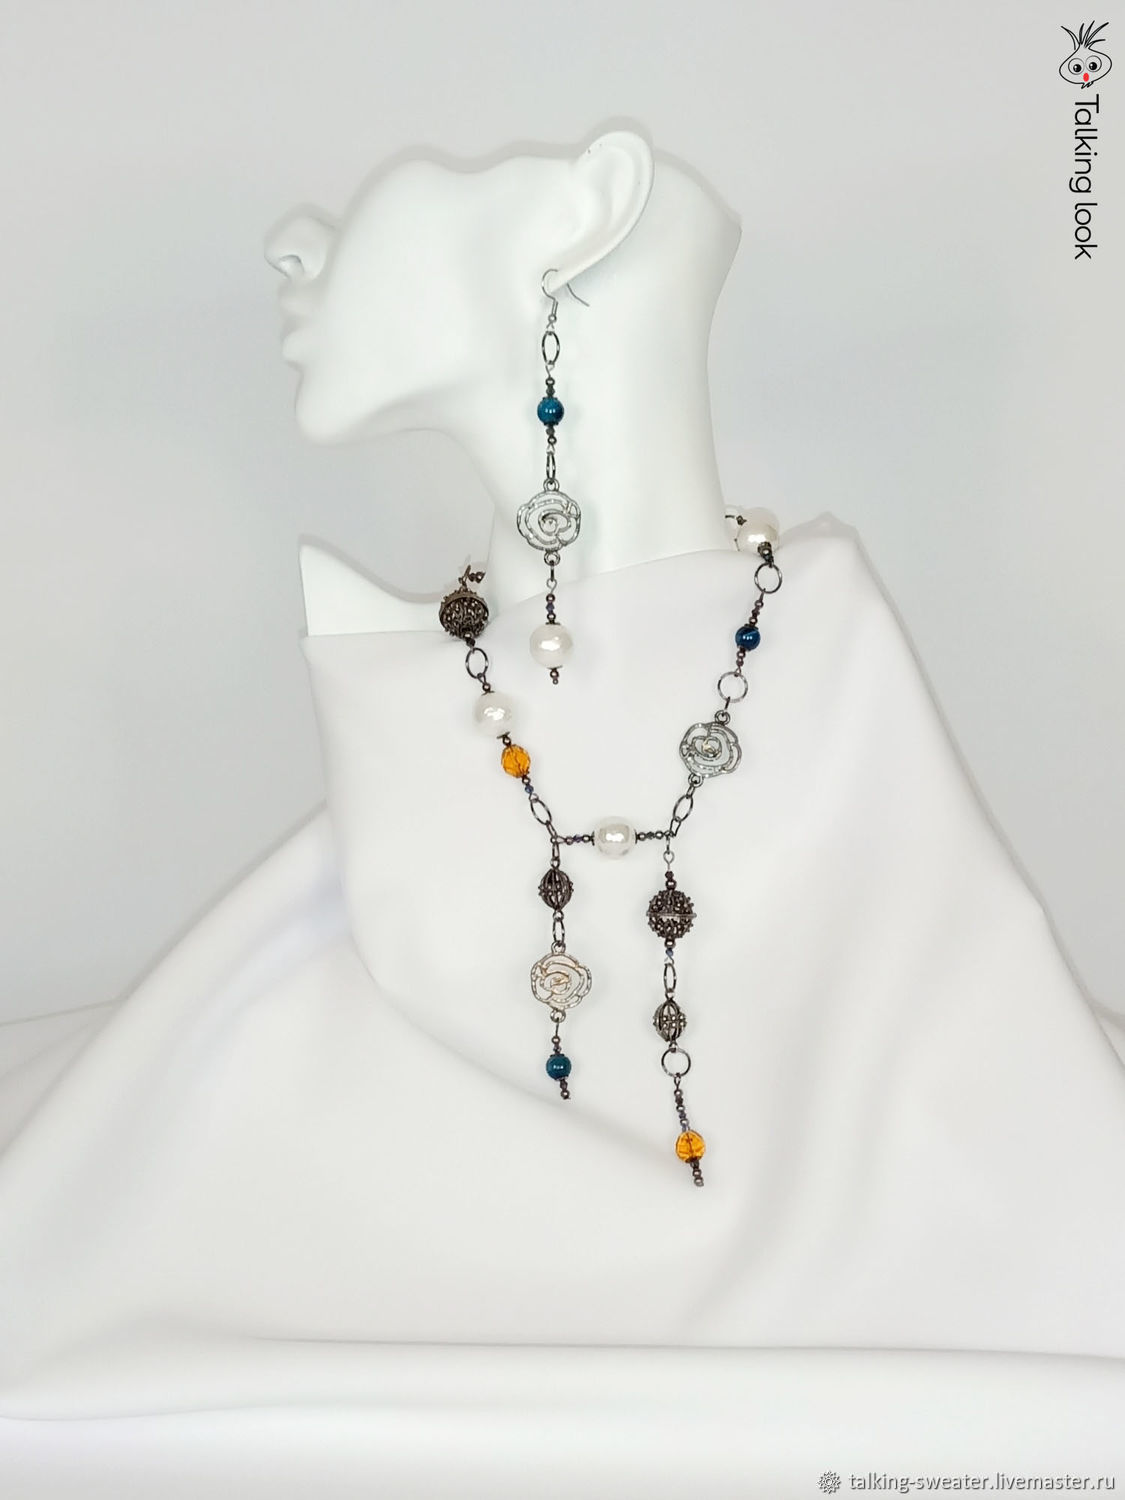 Jewelry set with tiger eye and pearls. Necklace and earrings, Jewelry Sets, St. Petersburg,  Фото №1